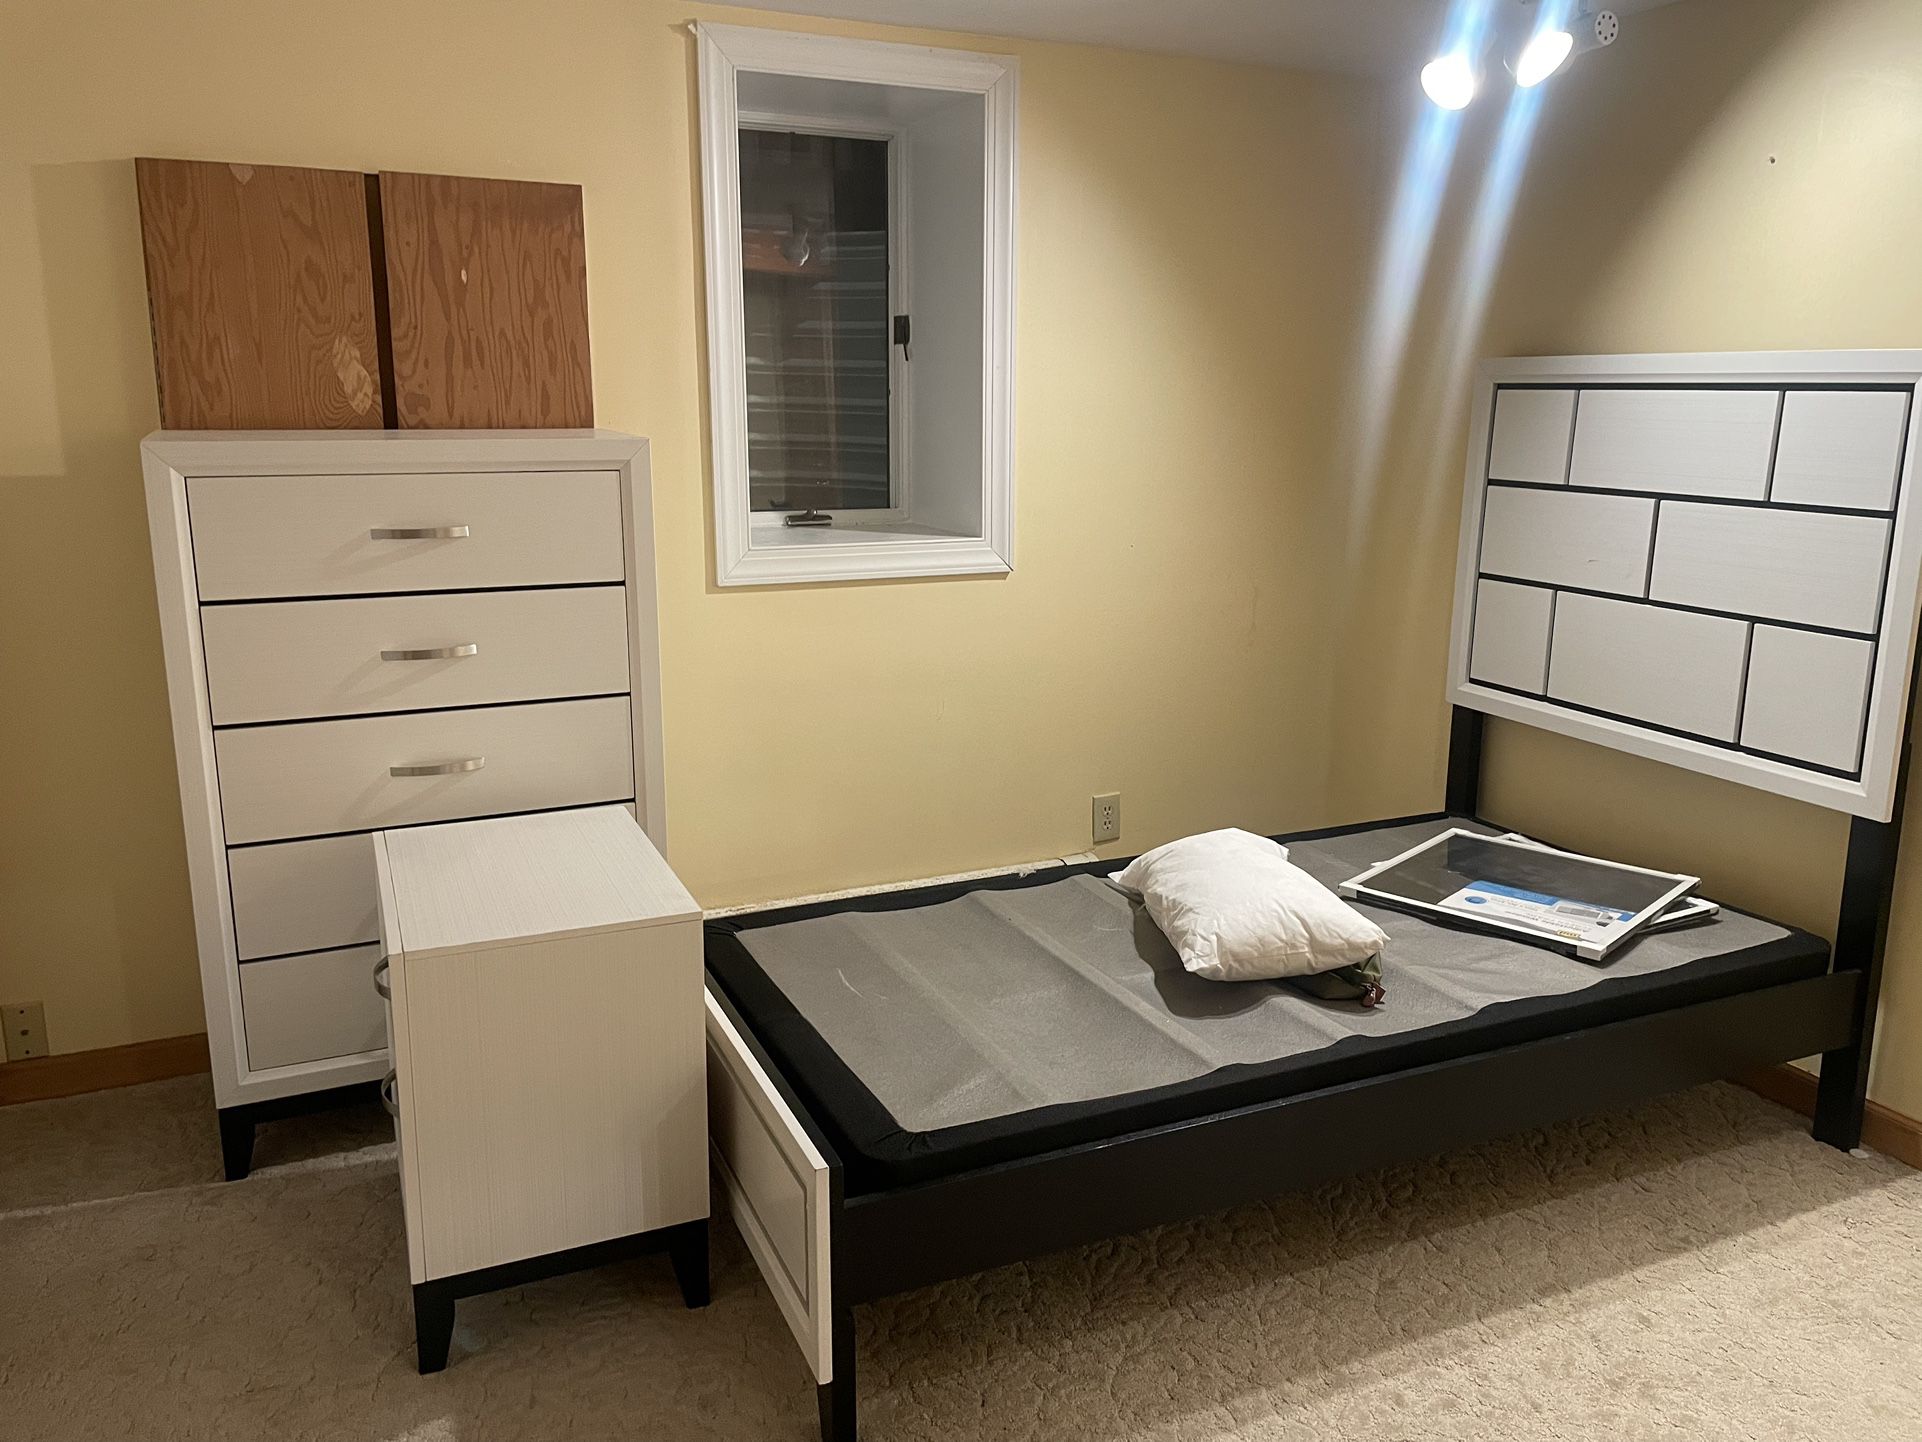 Nightstand & Twin Bed Frame + Box Spring